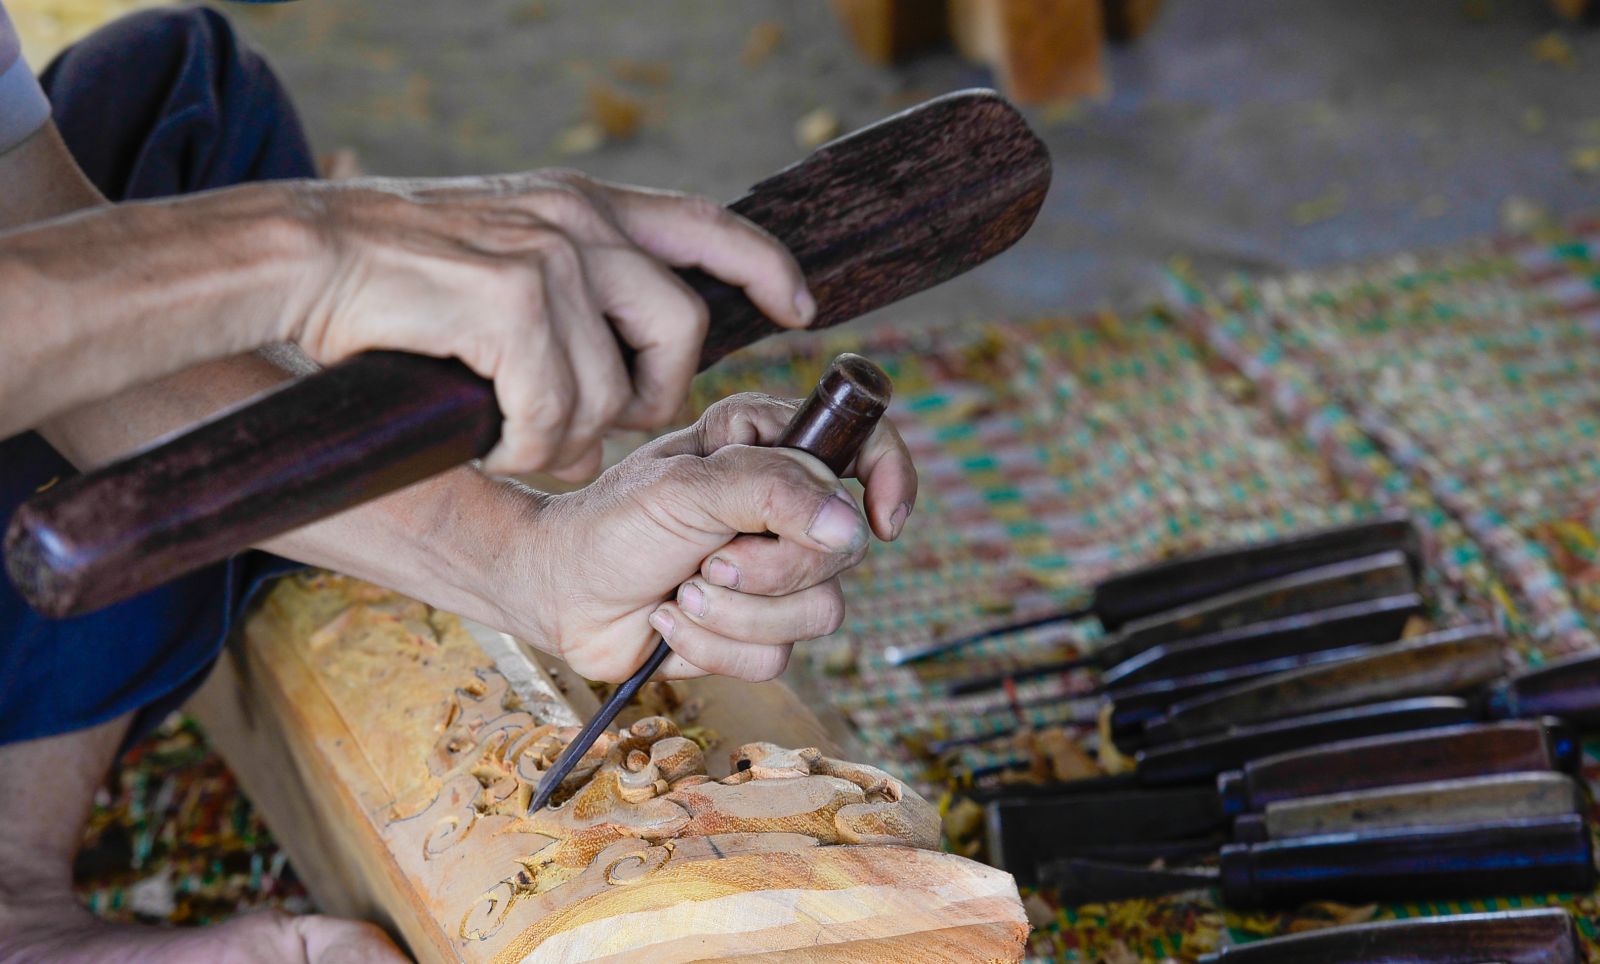 Carefully carving